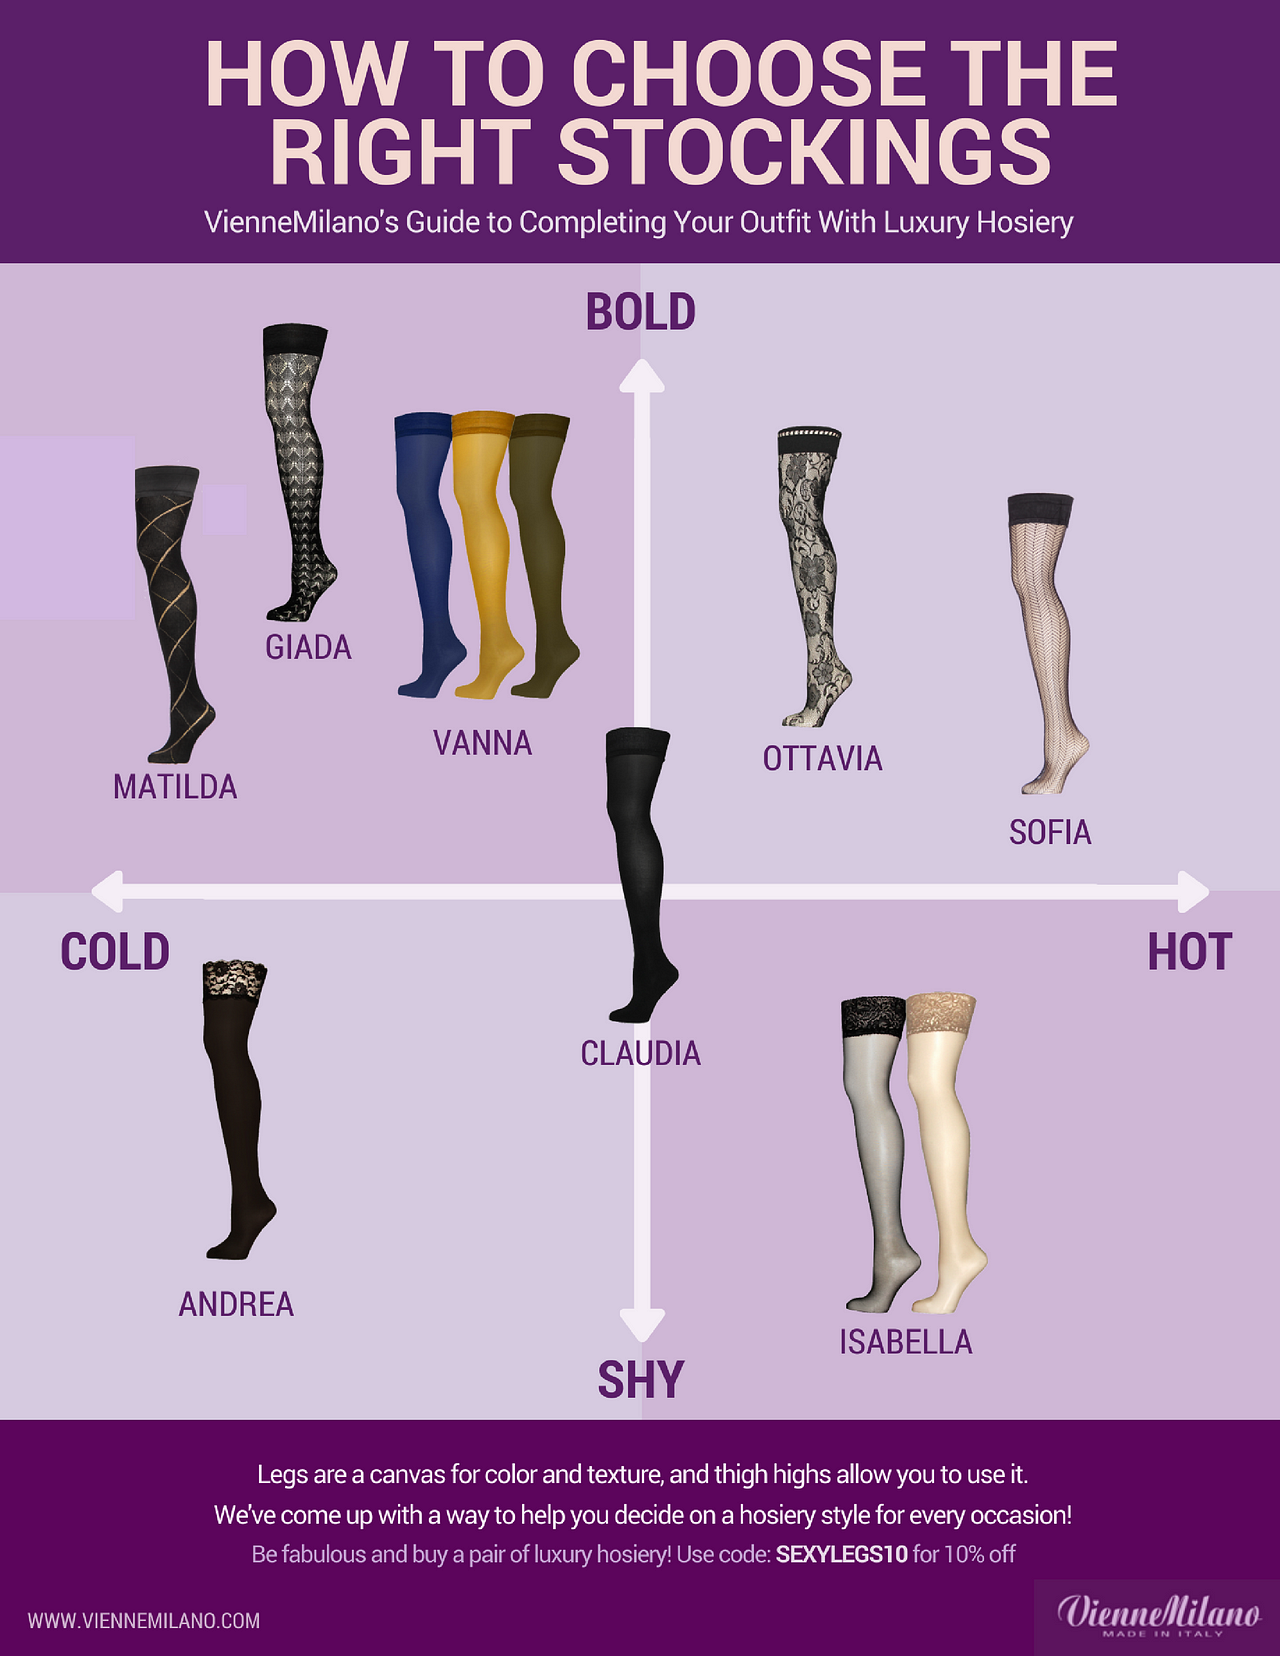 how-to-choose-stockings-infographic-by-viennemilano-medium